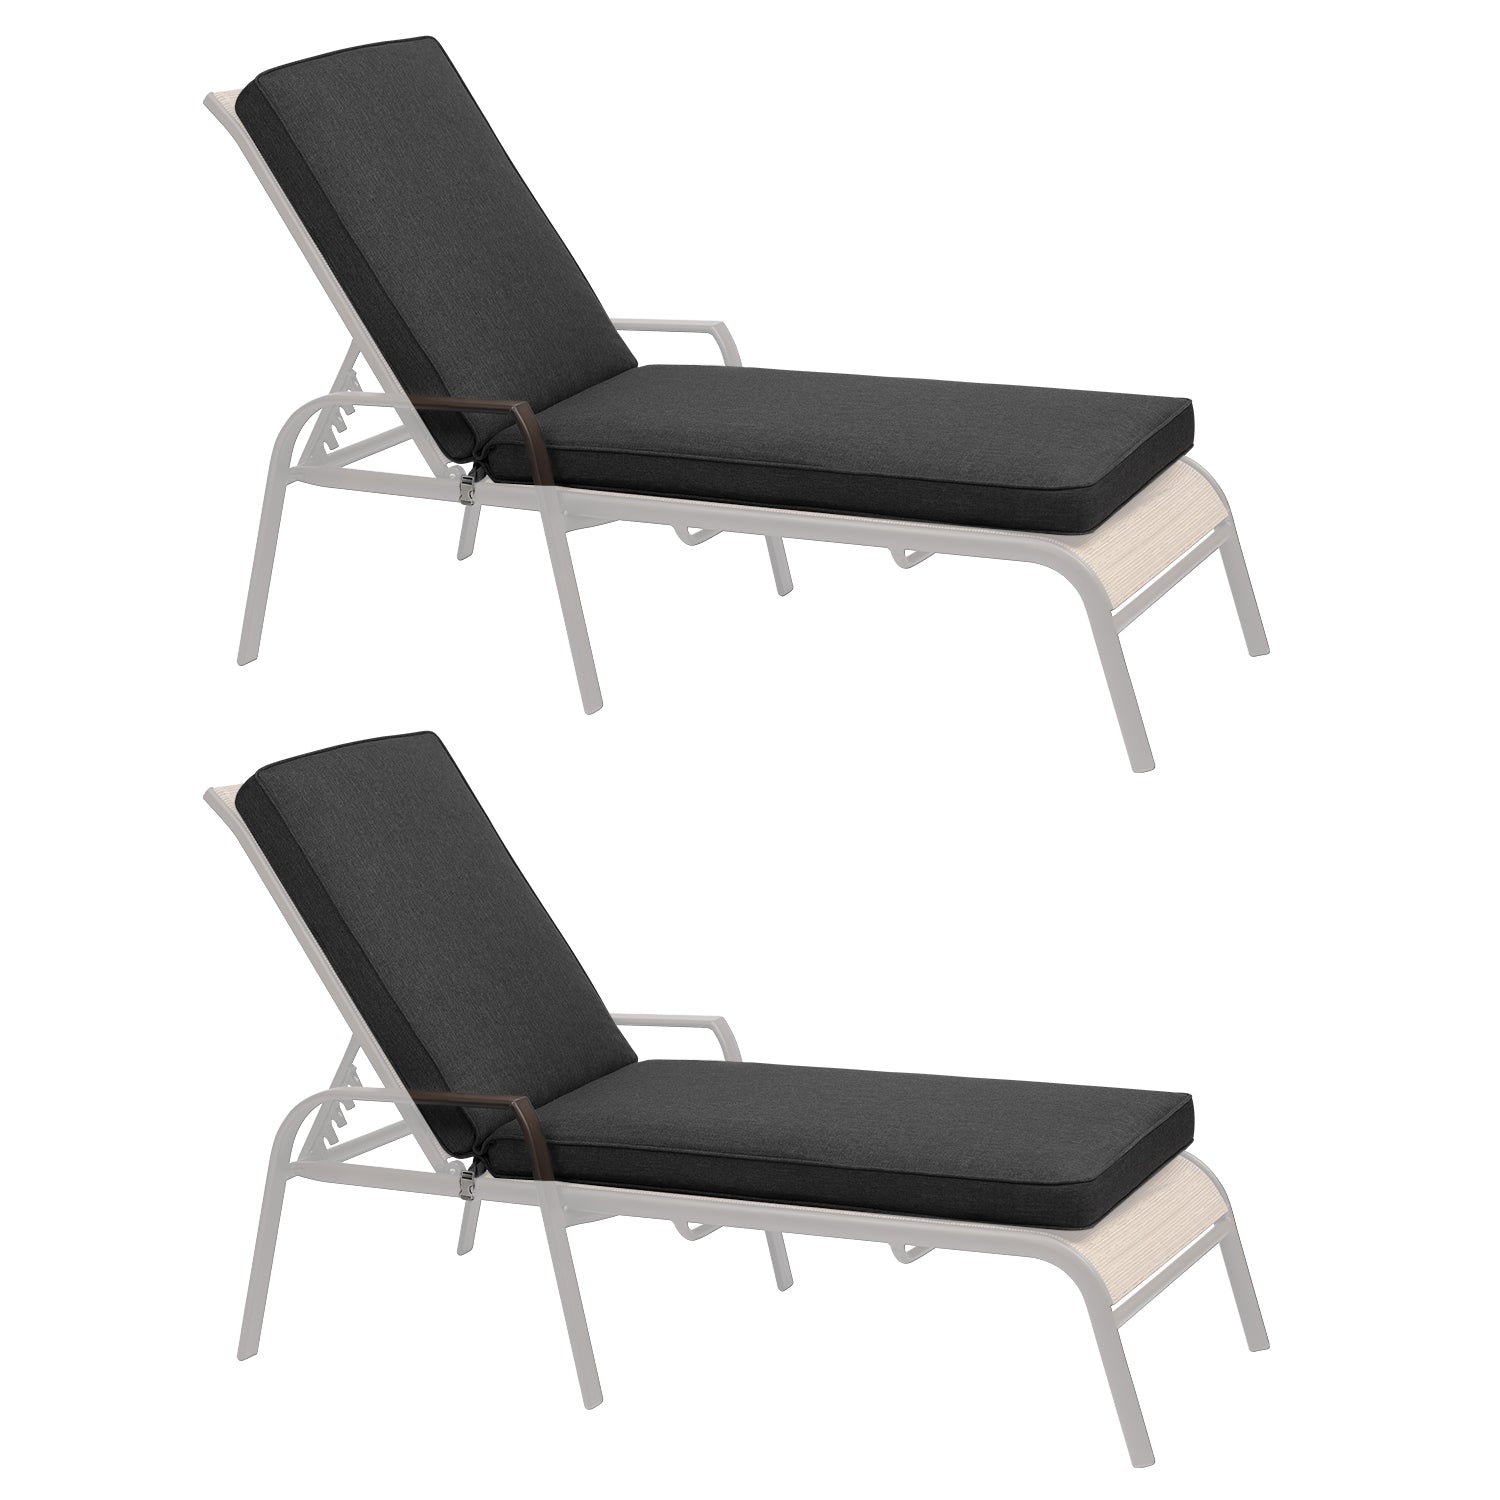 Patio Chaise Lounger Cushions Set of 2, Olefin Fabric, Water-Resistant, 72x21x3 Inches(Only Cushions) CUSHION Aoodor Charcoal  